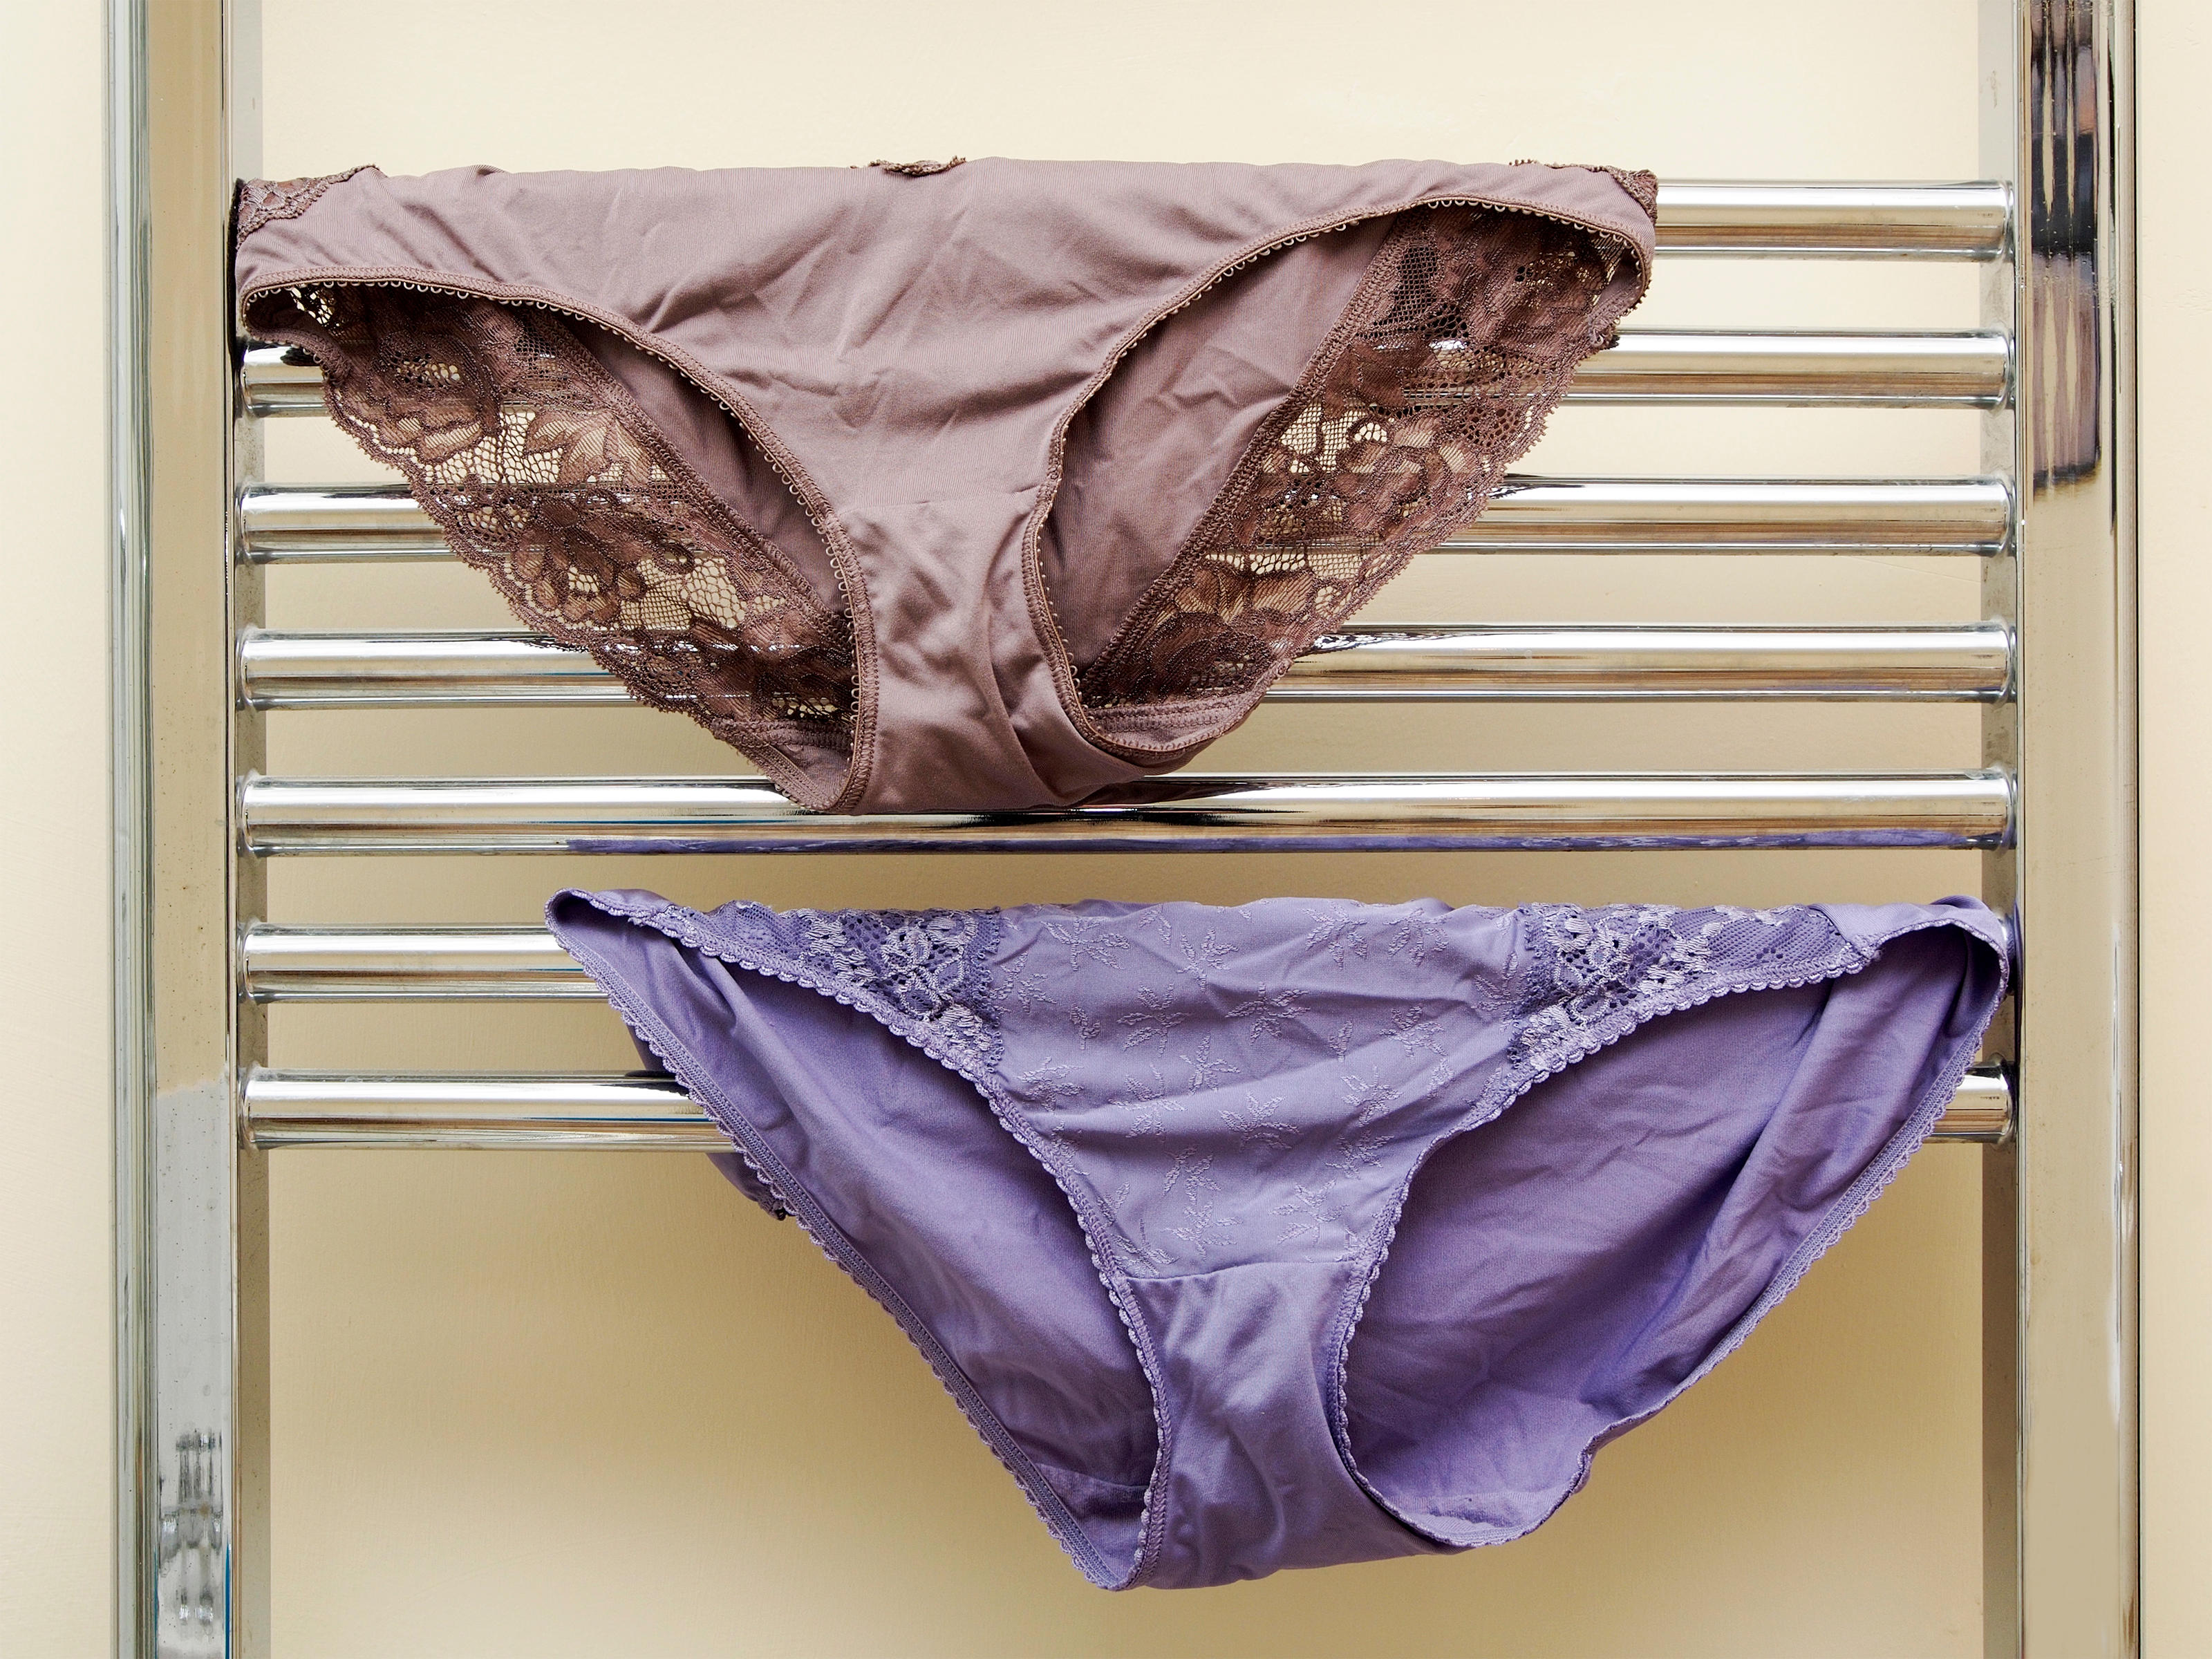 The Real Reason Women Have Underwear Pockets - Forgot To Think